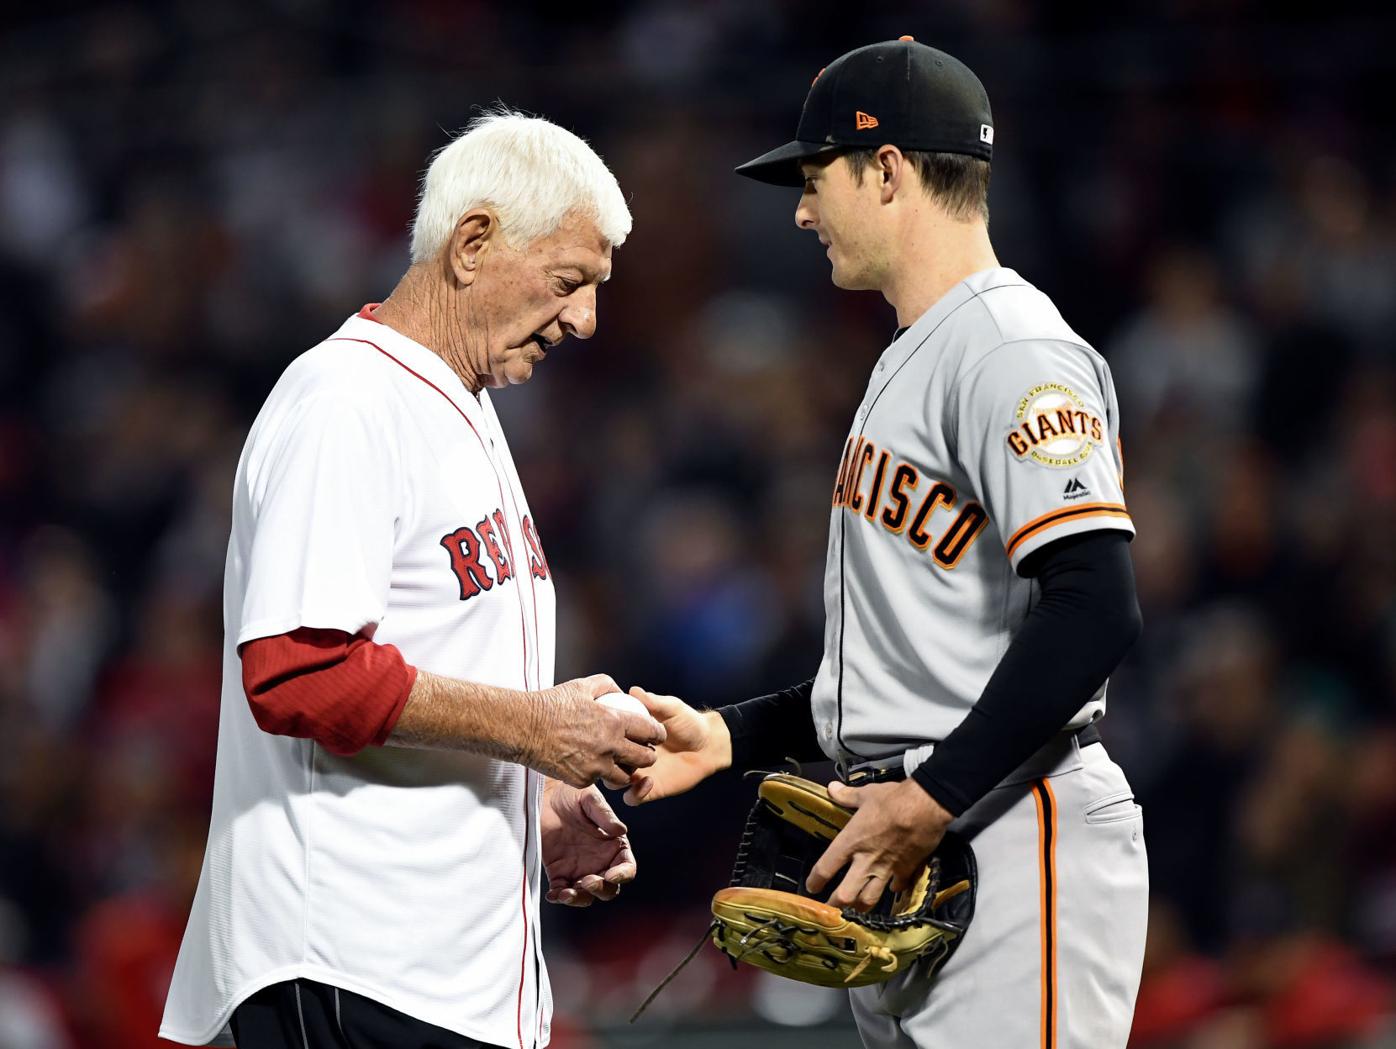 There's a Yastrzemski playing in Fenway again